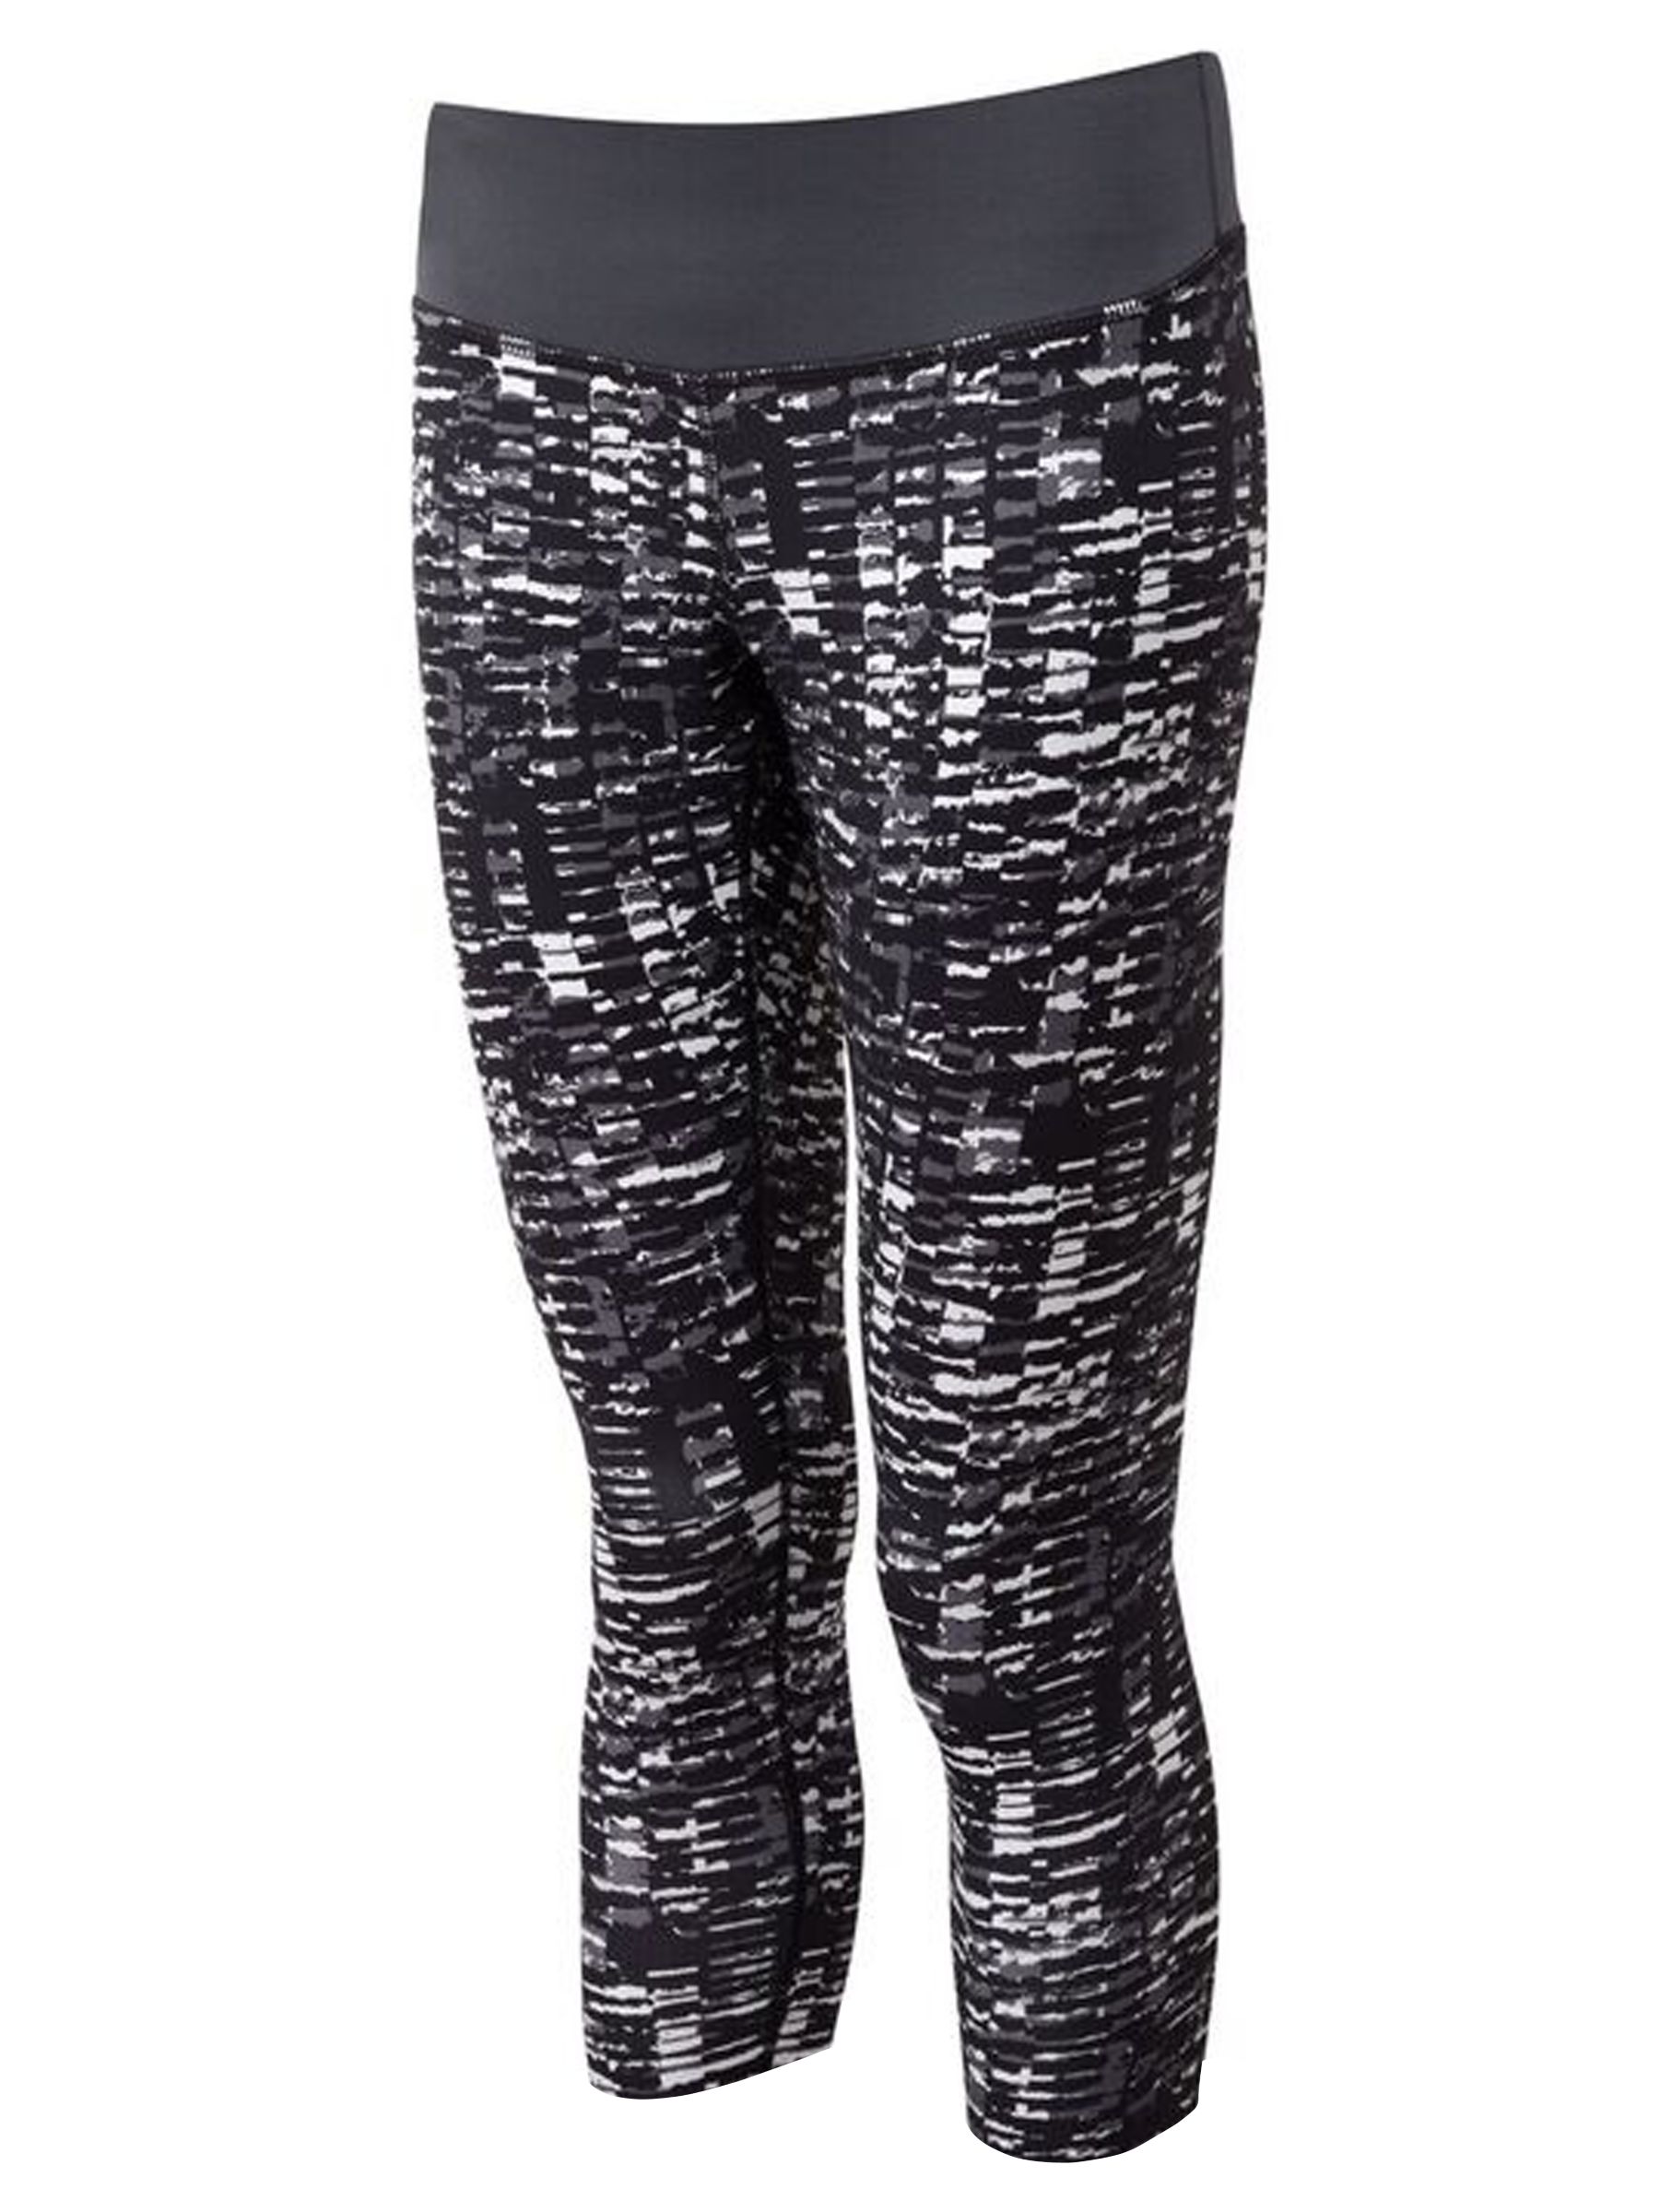 Ronhill Momentum Cropped Running Tights, Grey Sponge, 14